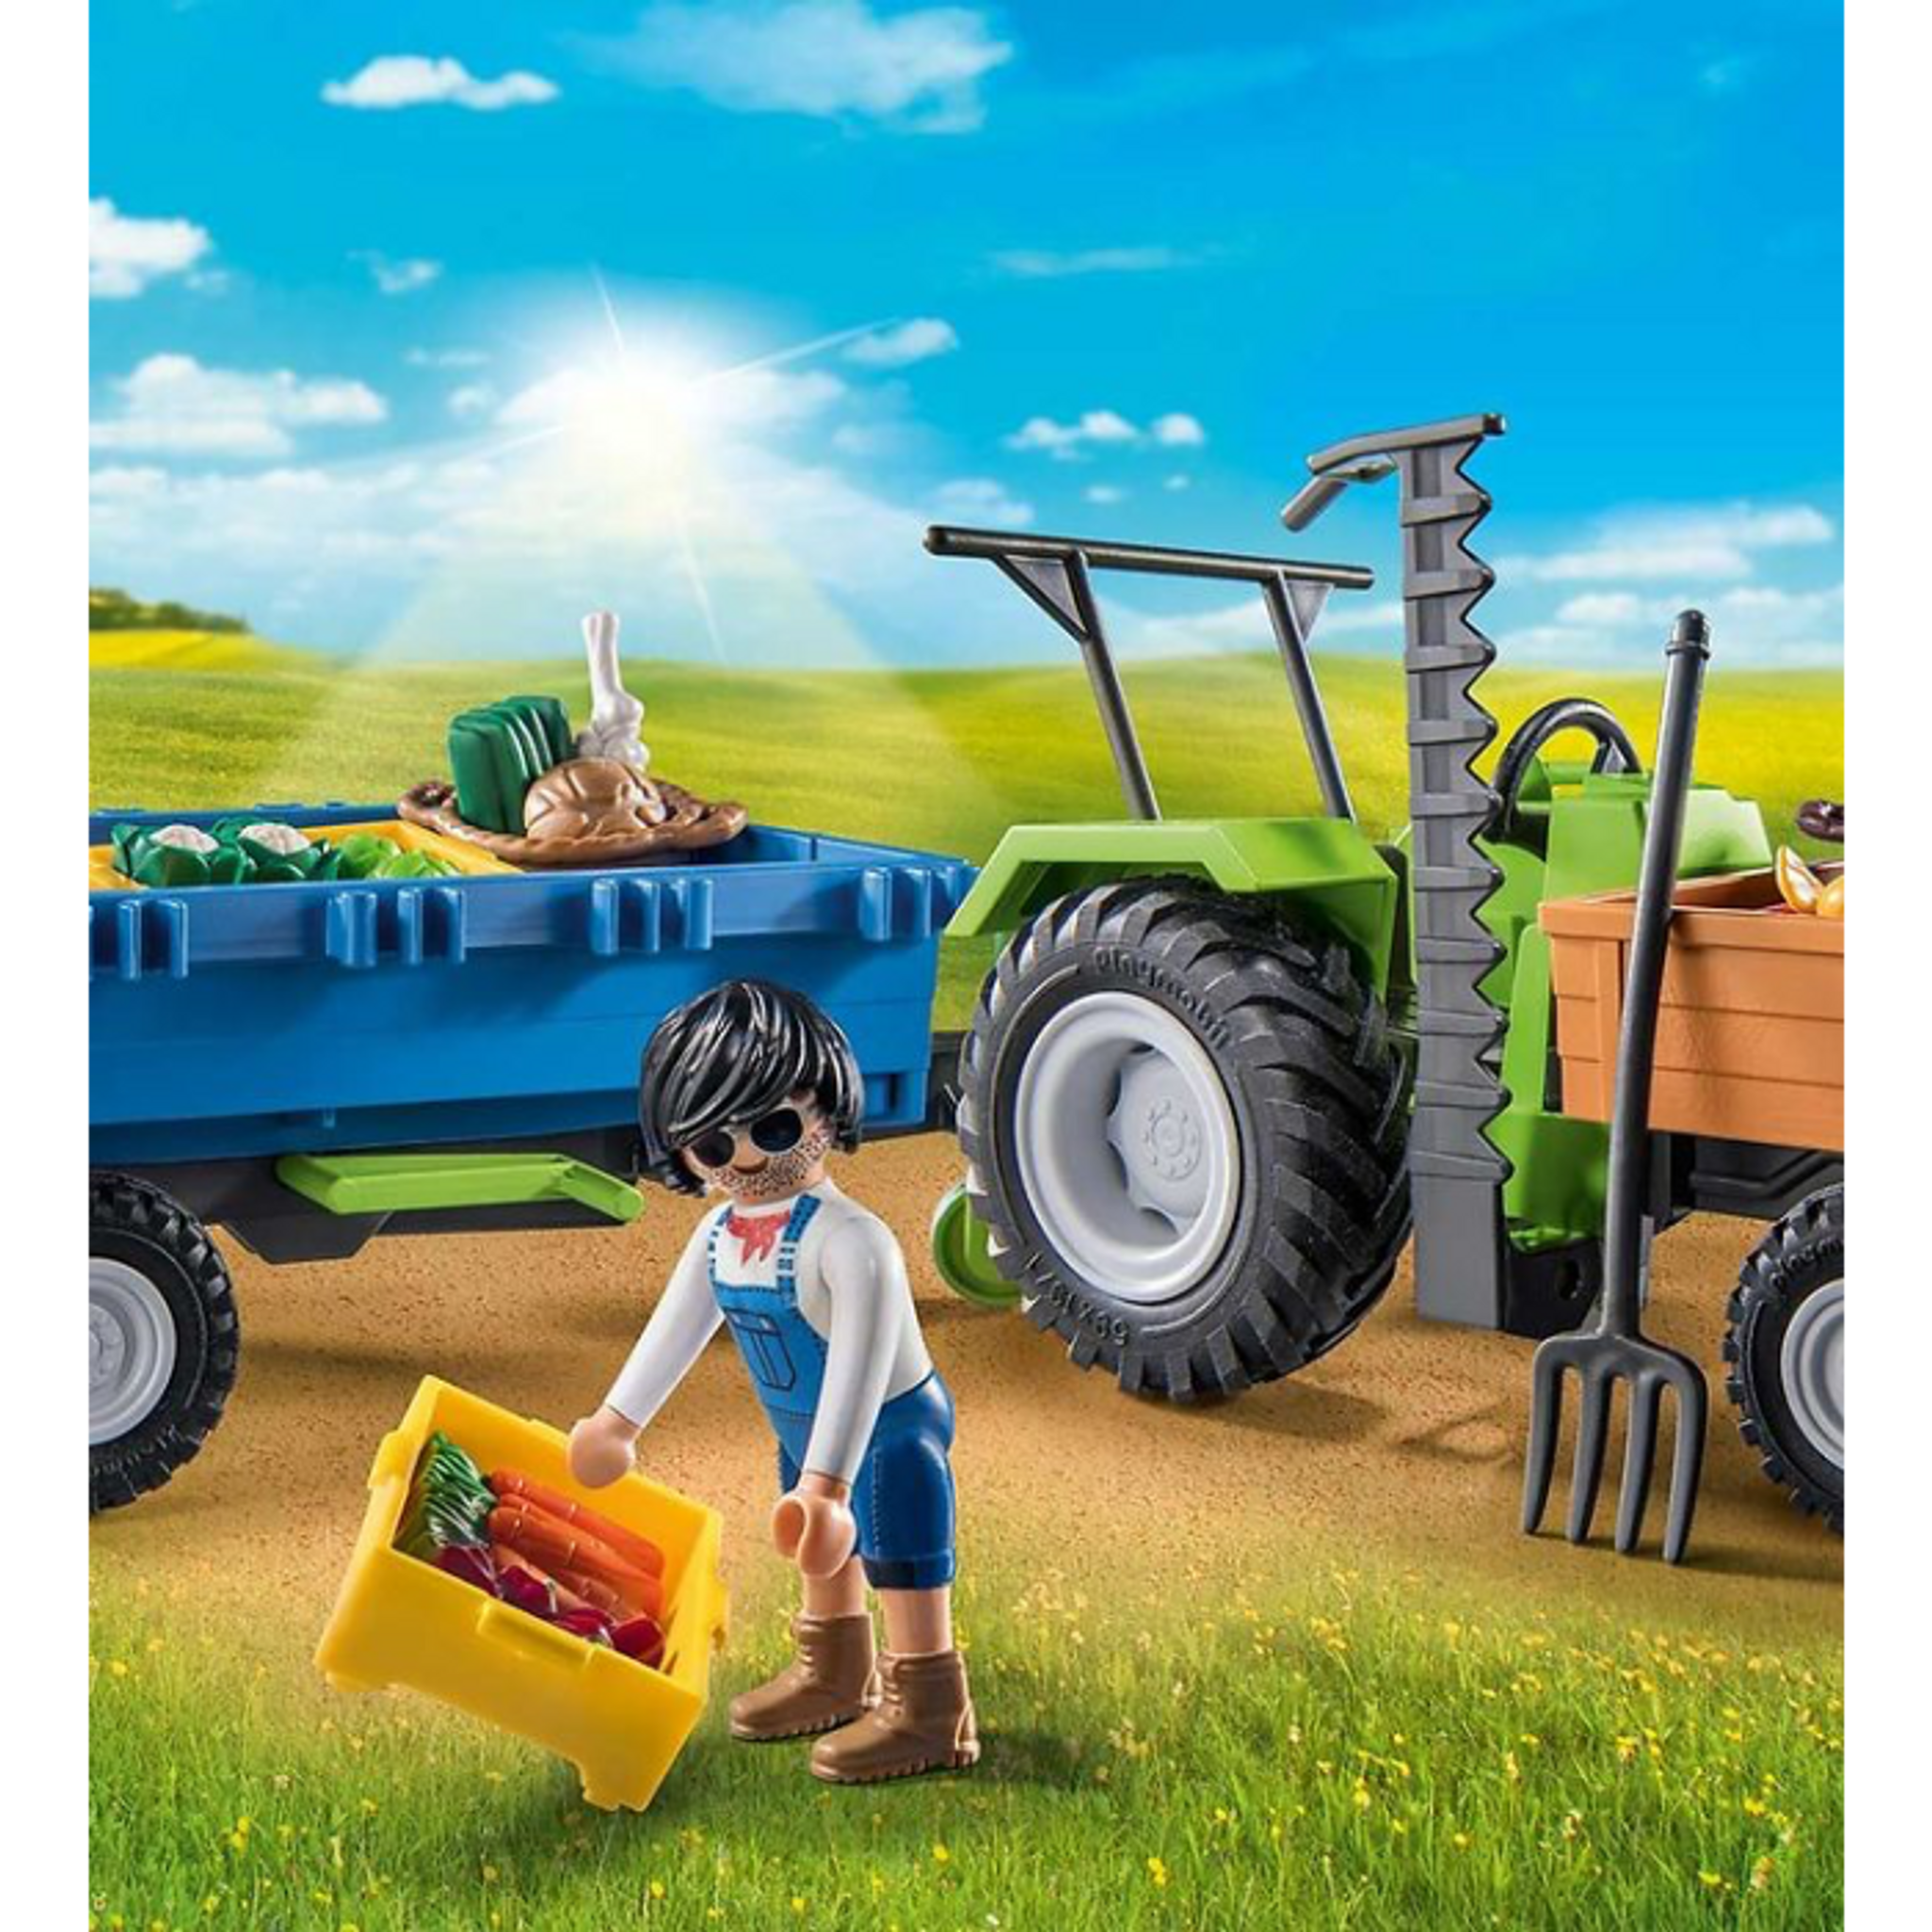 PLAYMOBIL Tractor with Trailer Play Vehicle 